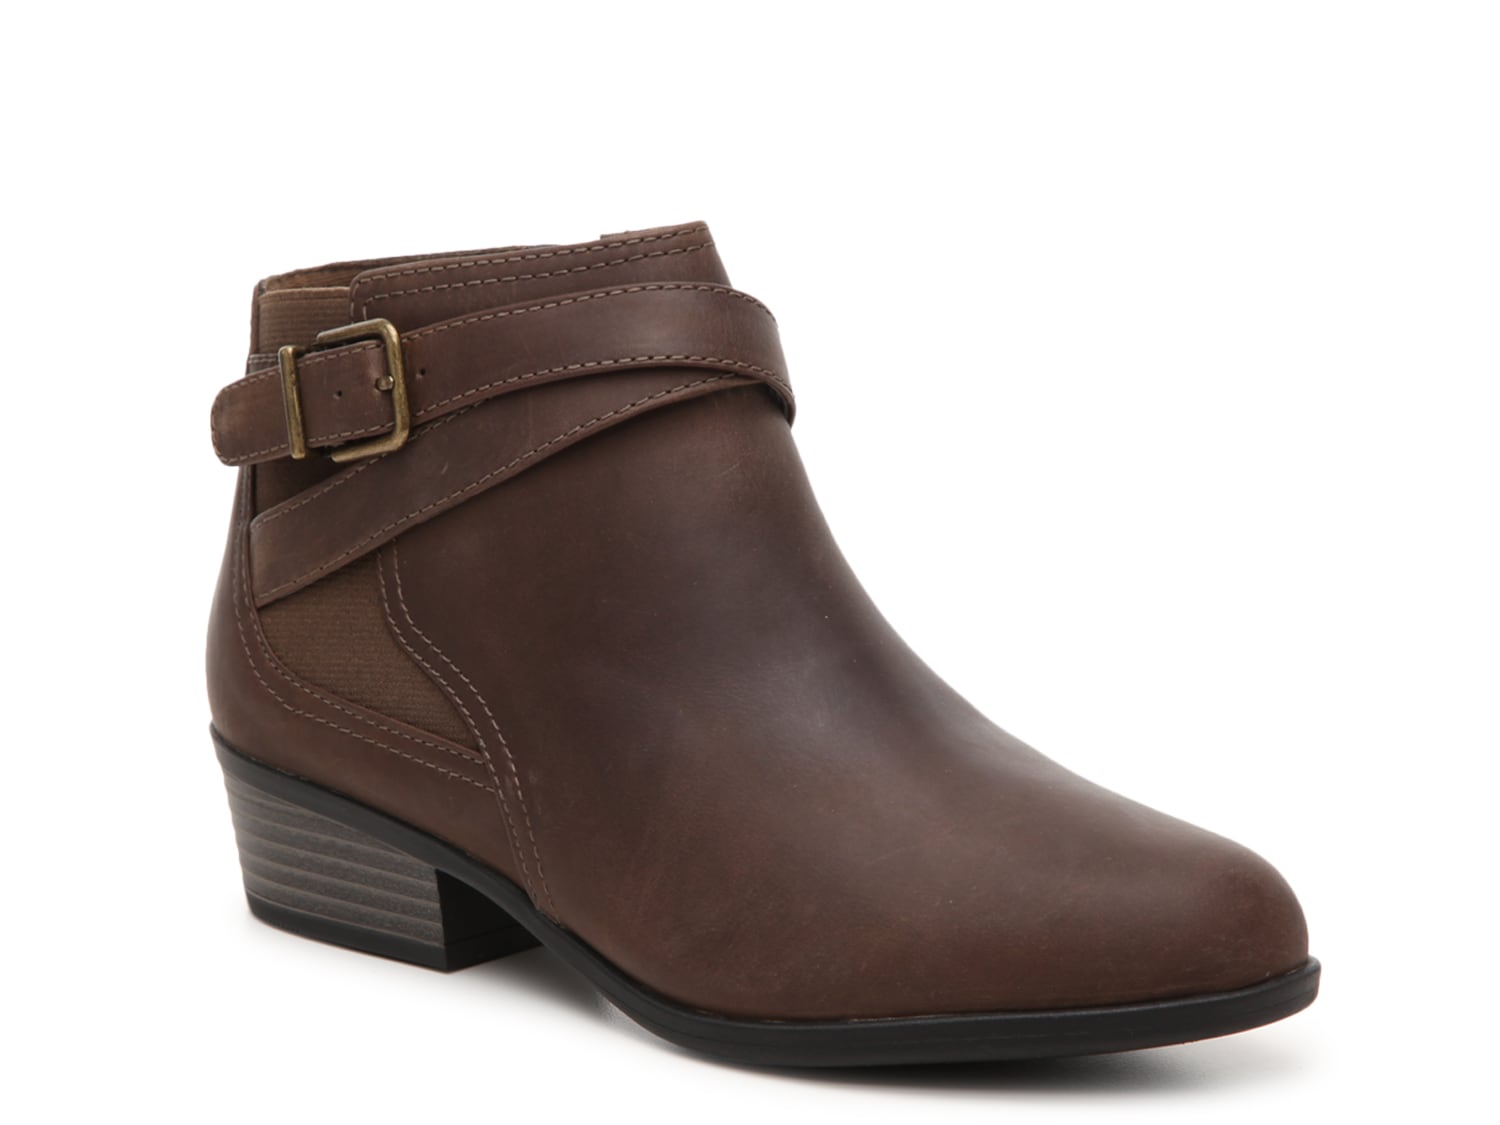 clarks womens shoes dsw